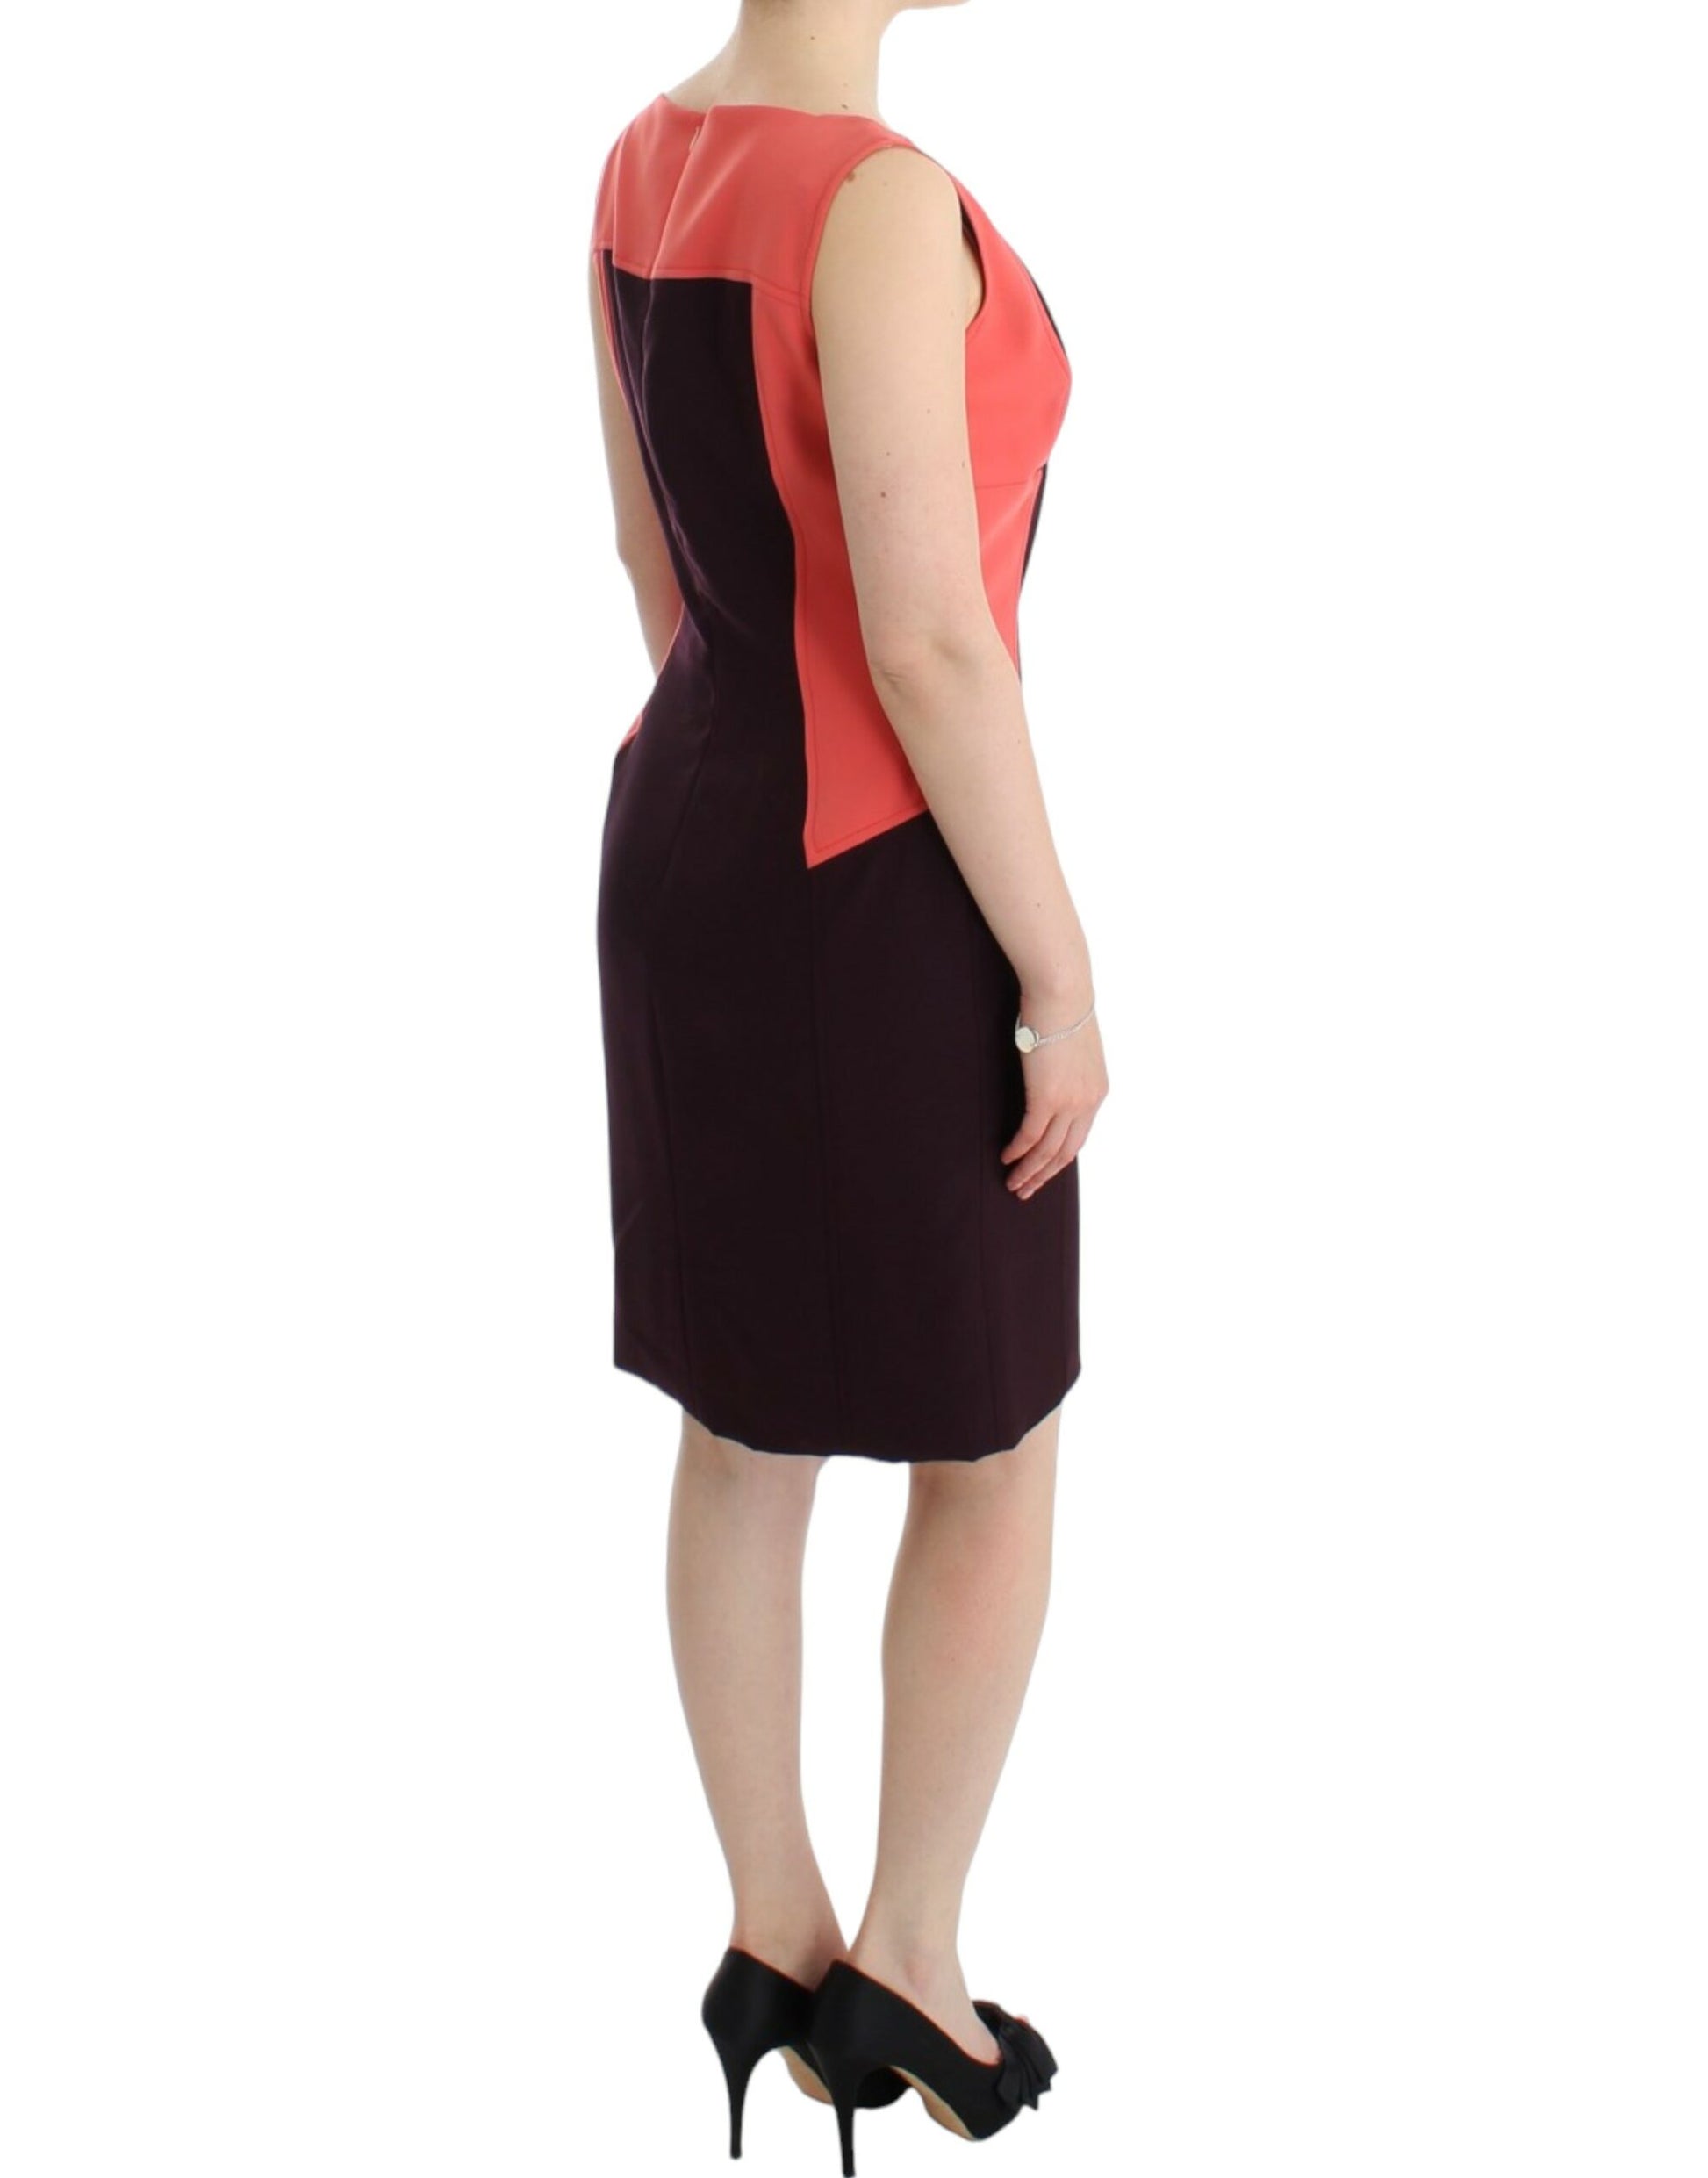 Multicolor Pencil Dress with Artistic Flair